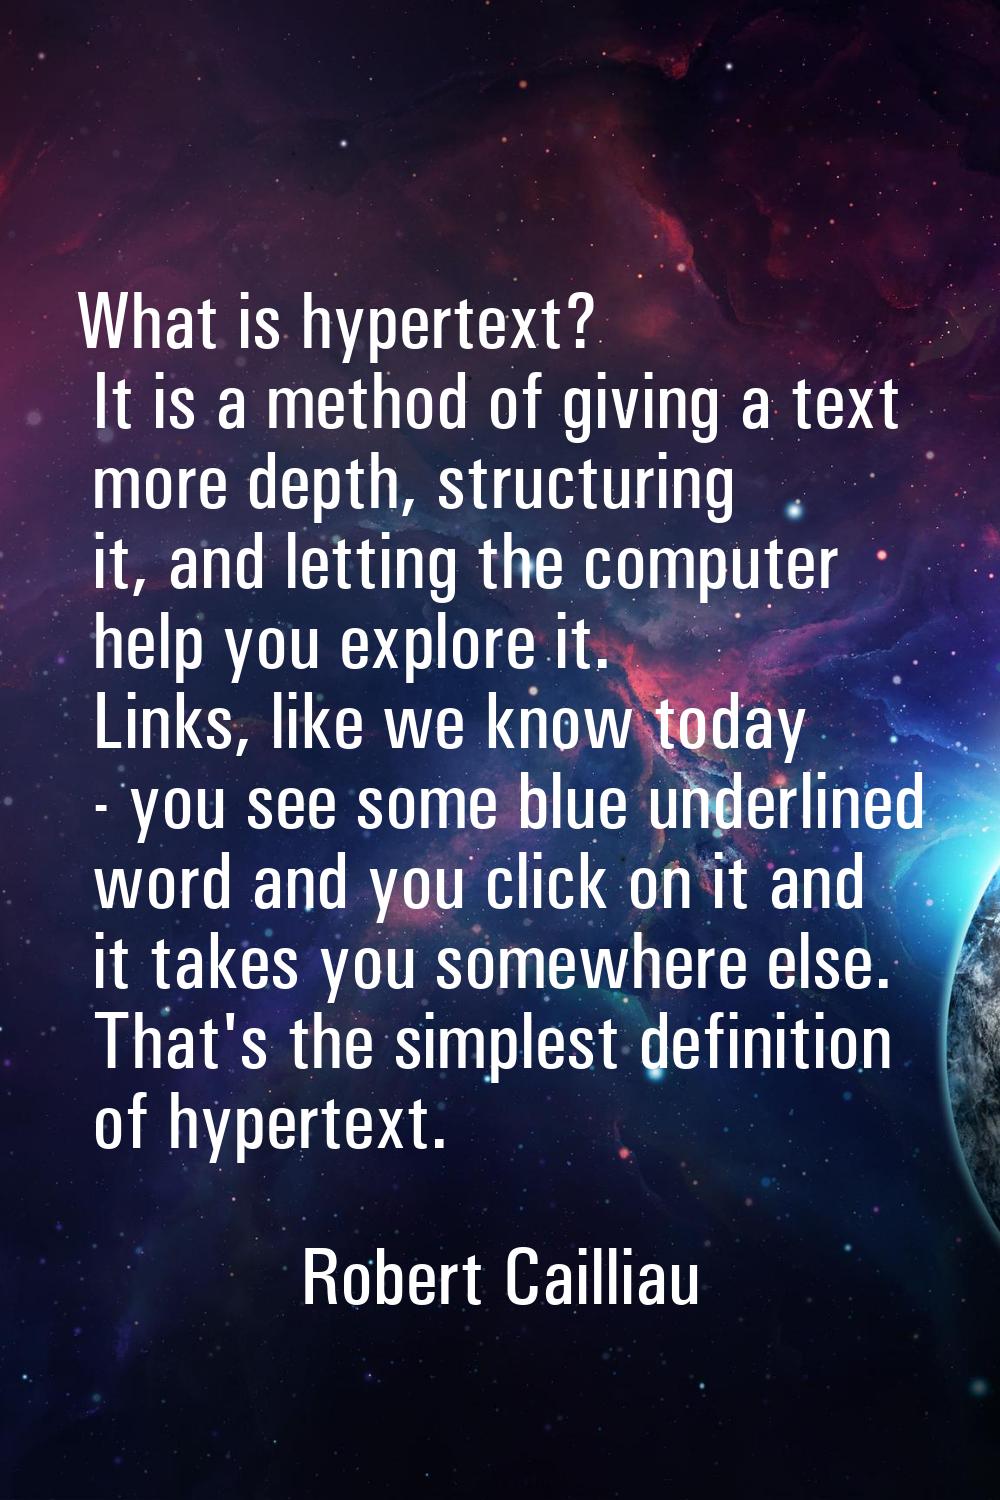 What is hypertext? It is a method of giving a text more depth, structuring it, and letting the comp